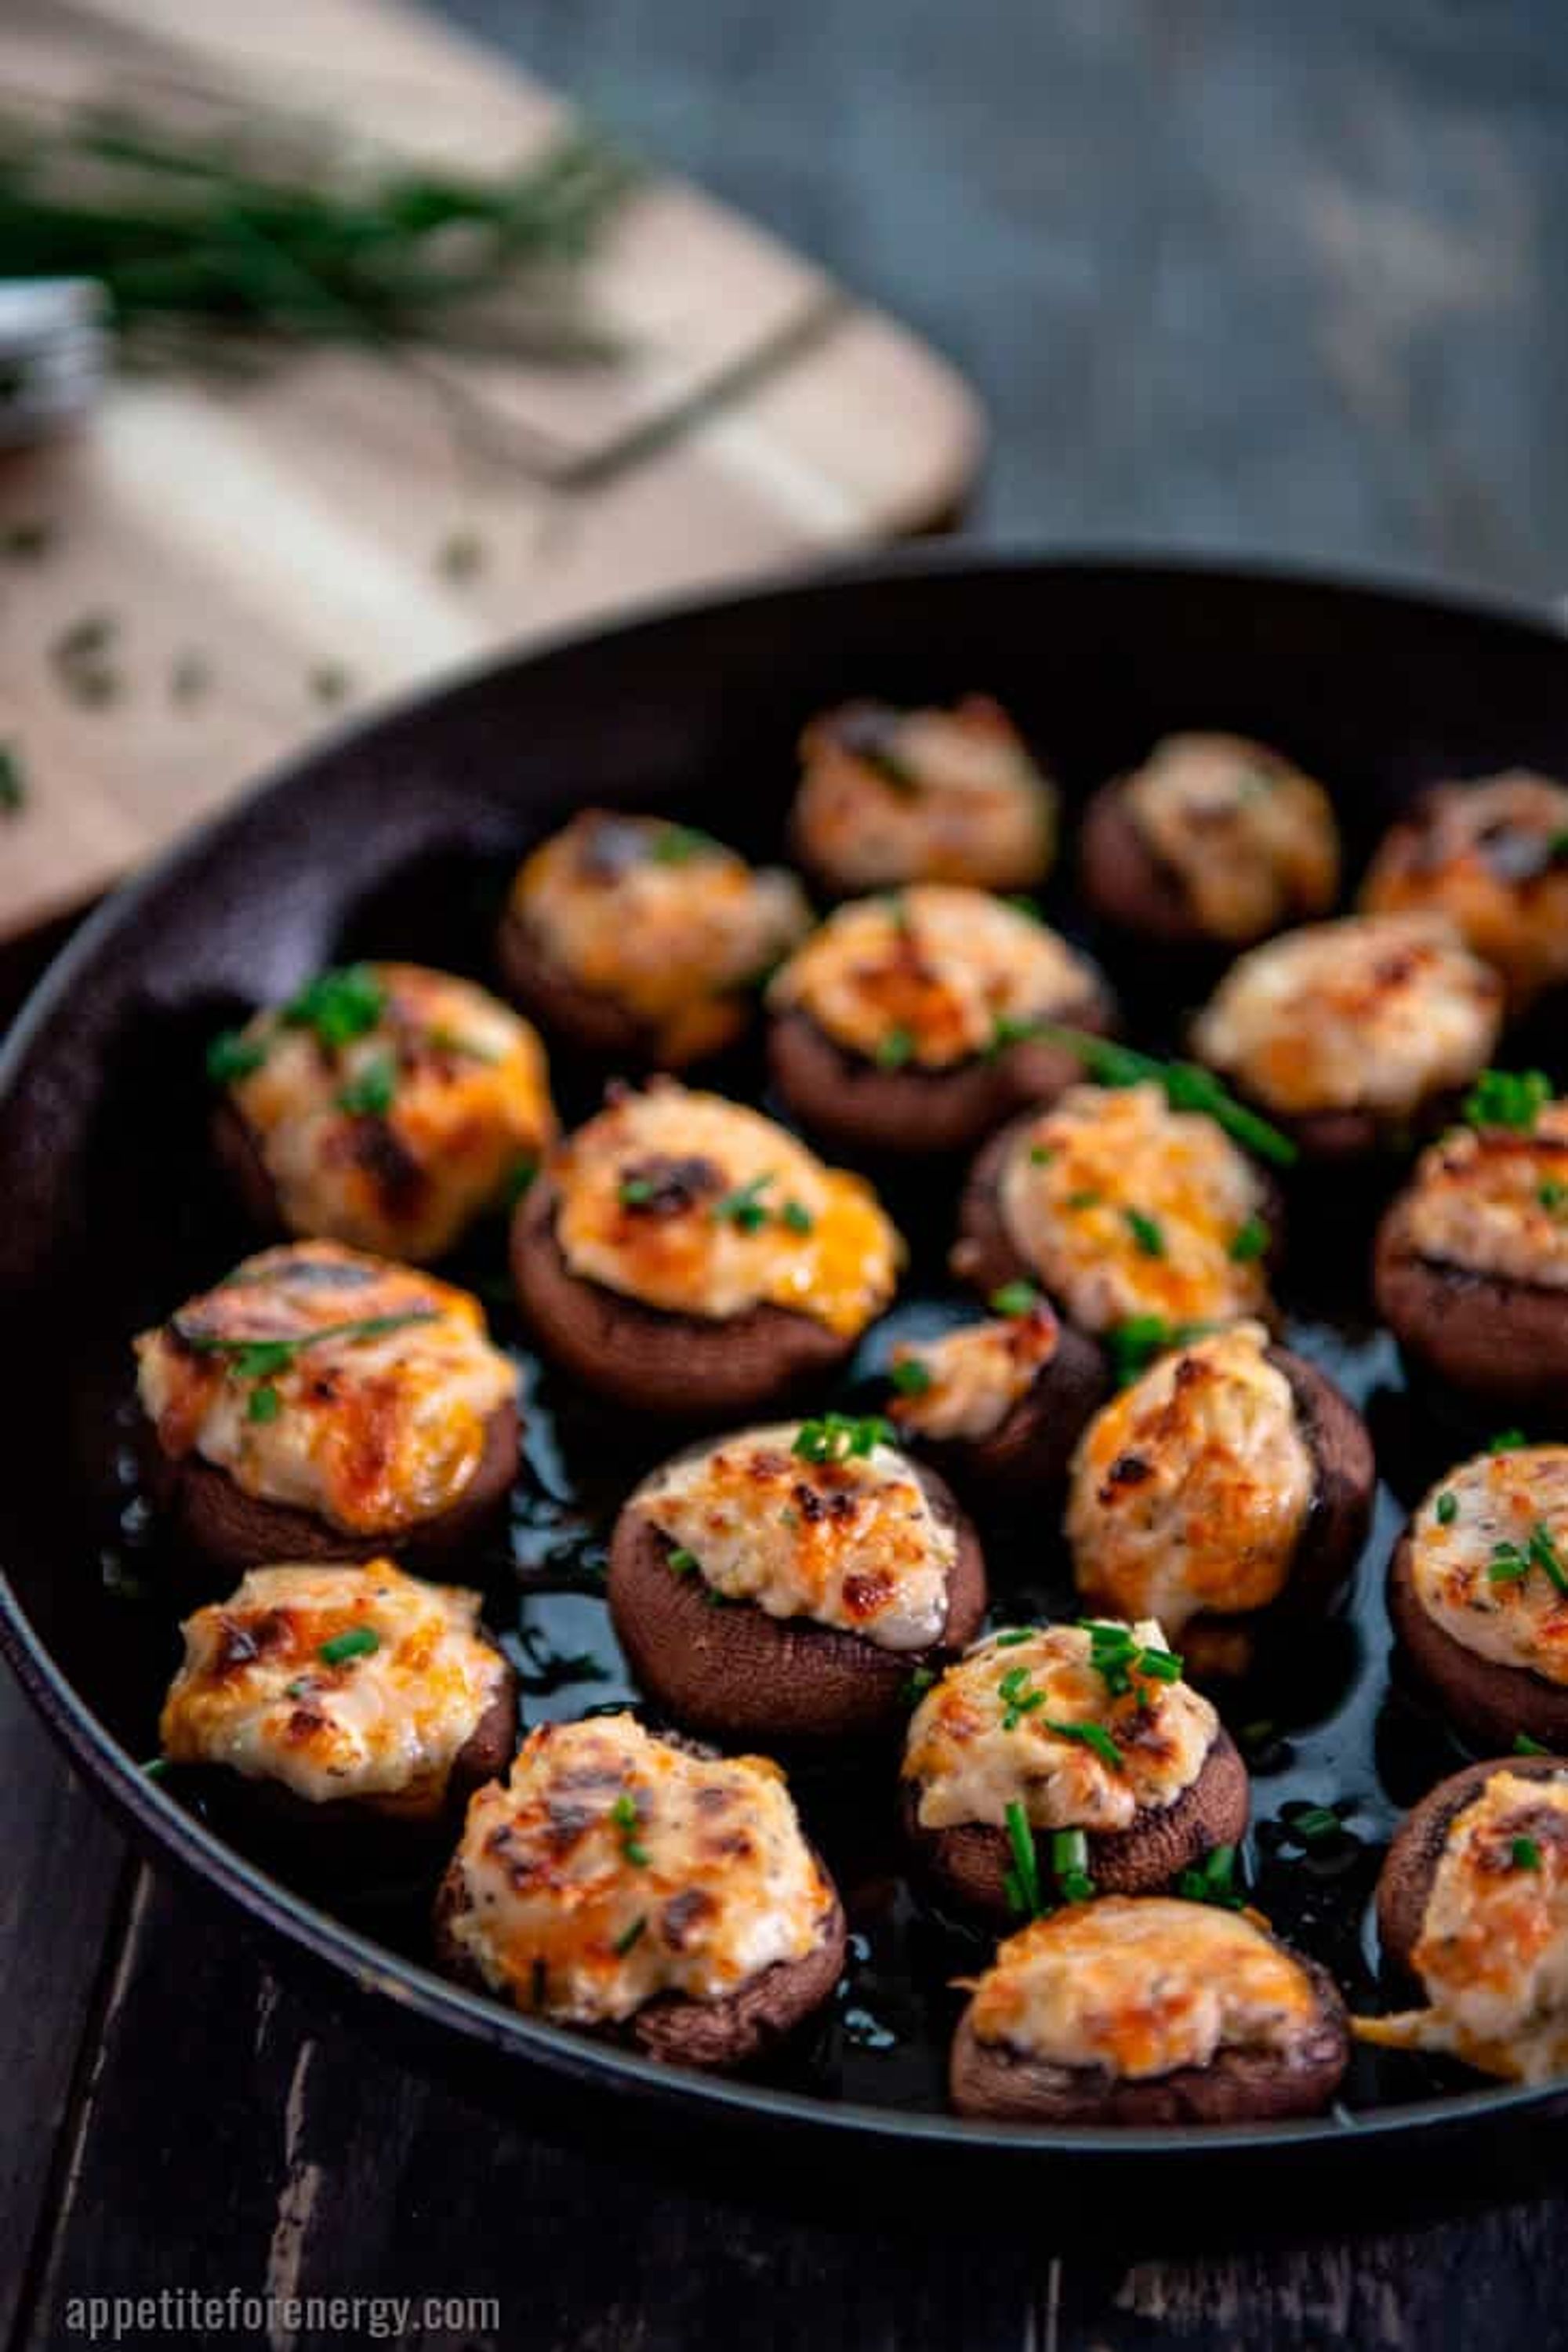 30-Minute Herb & Cream Cheese Stuffed Mushrooms | Appetite For Energy